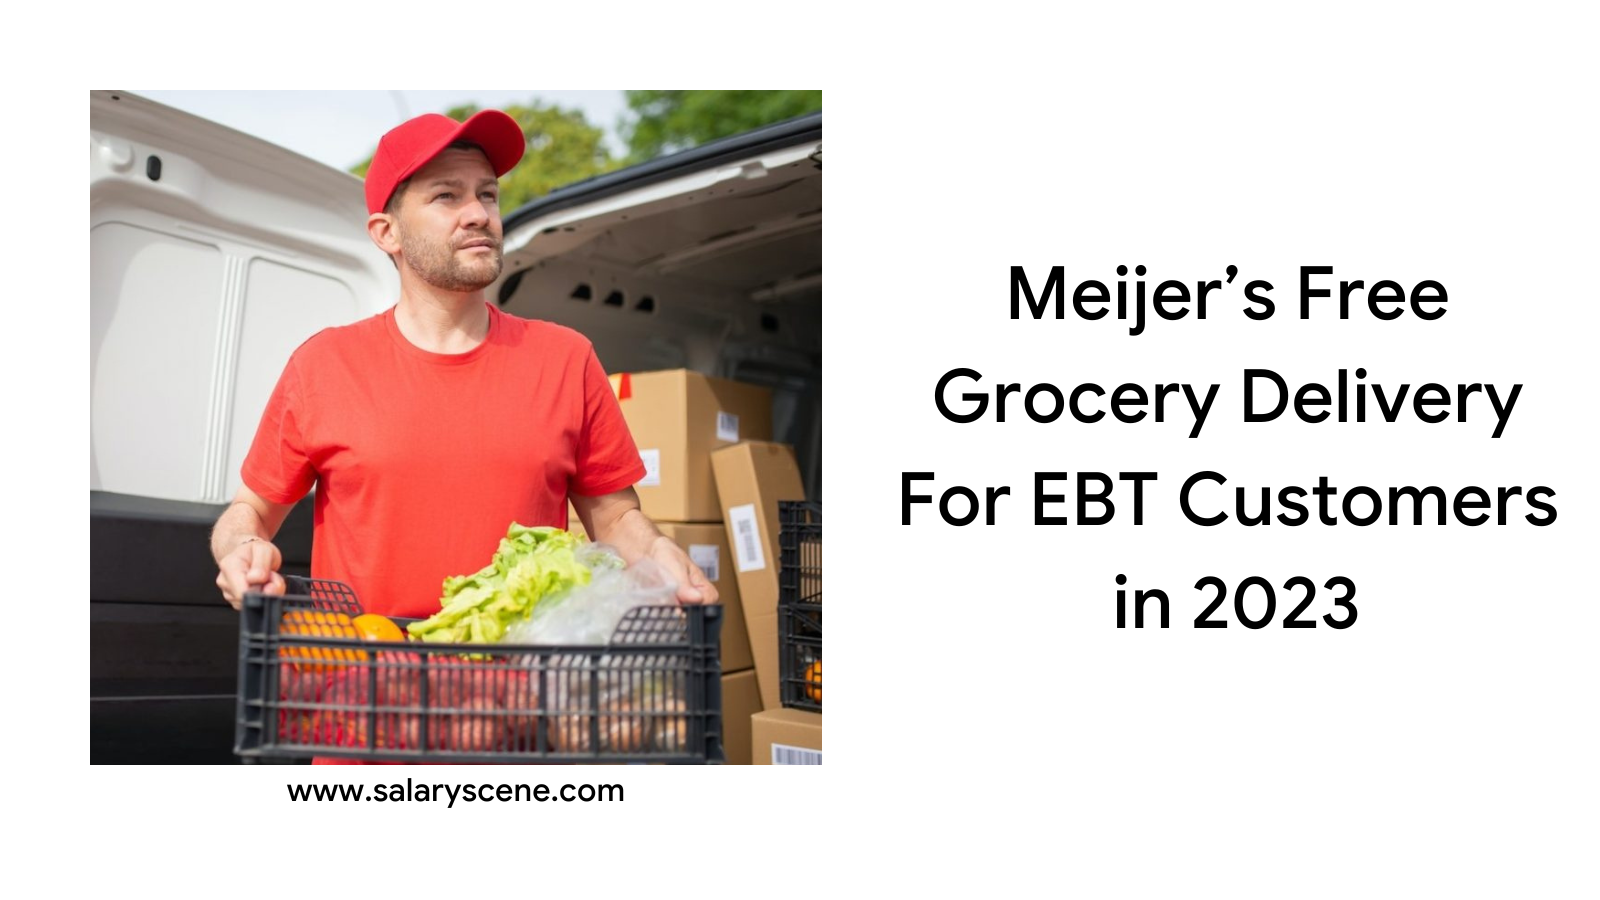 Does Meijer Offer Free Grocery Delivery For EBT Customers in 2023 Everything You Need To Know